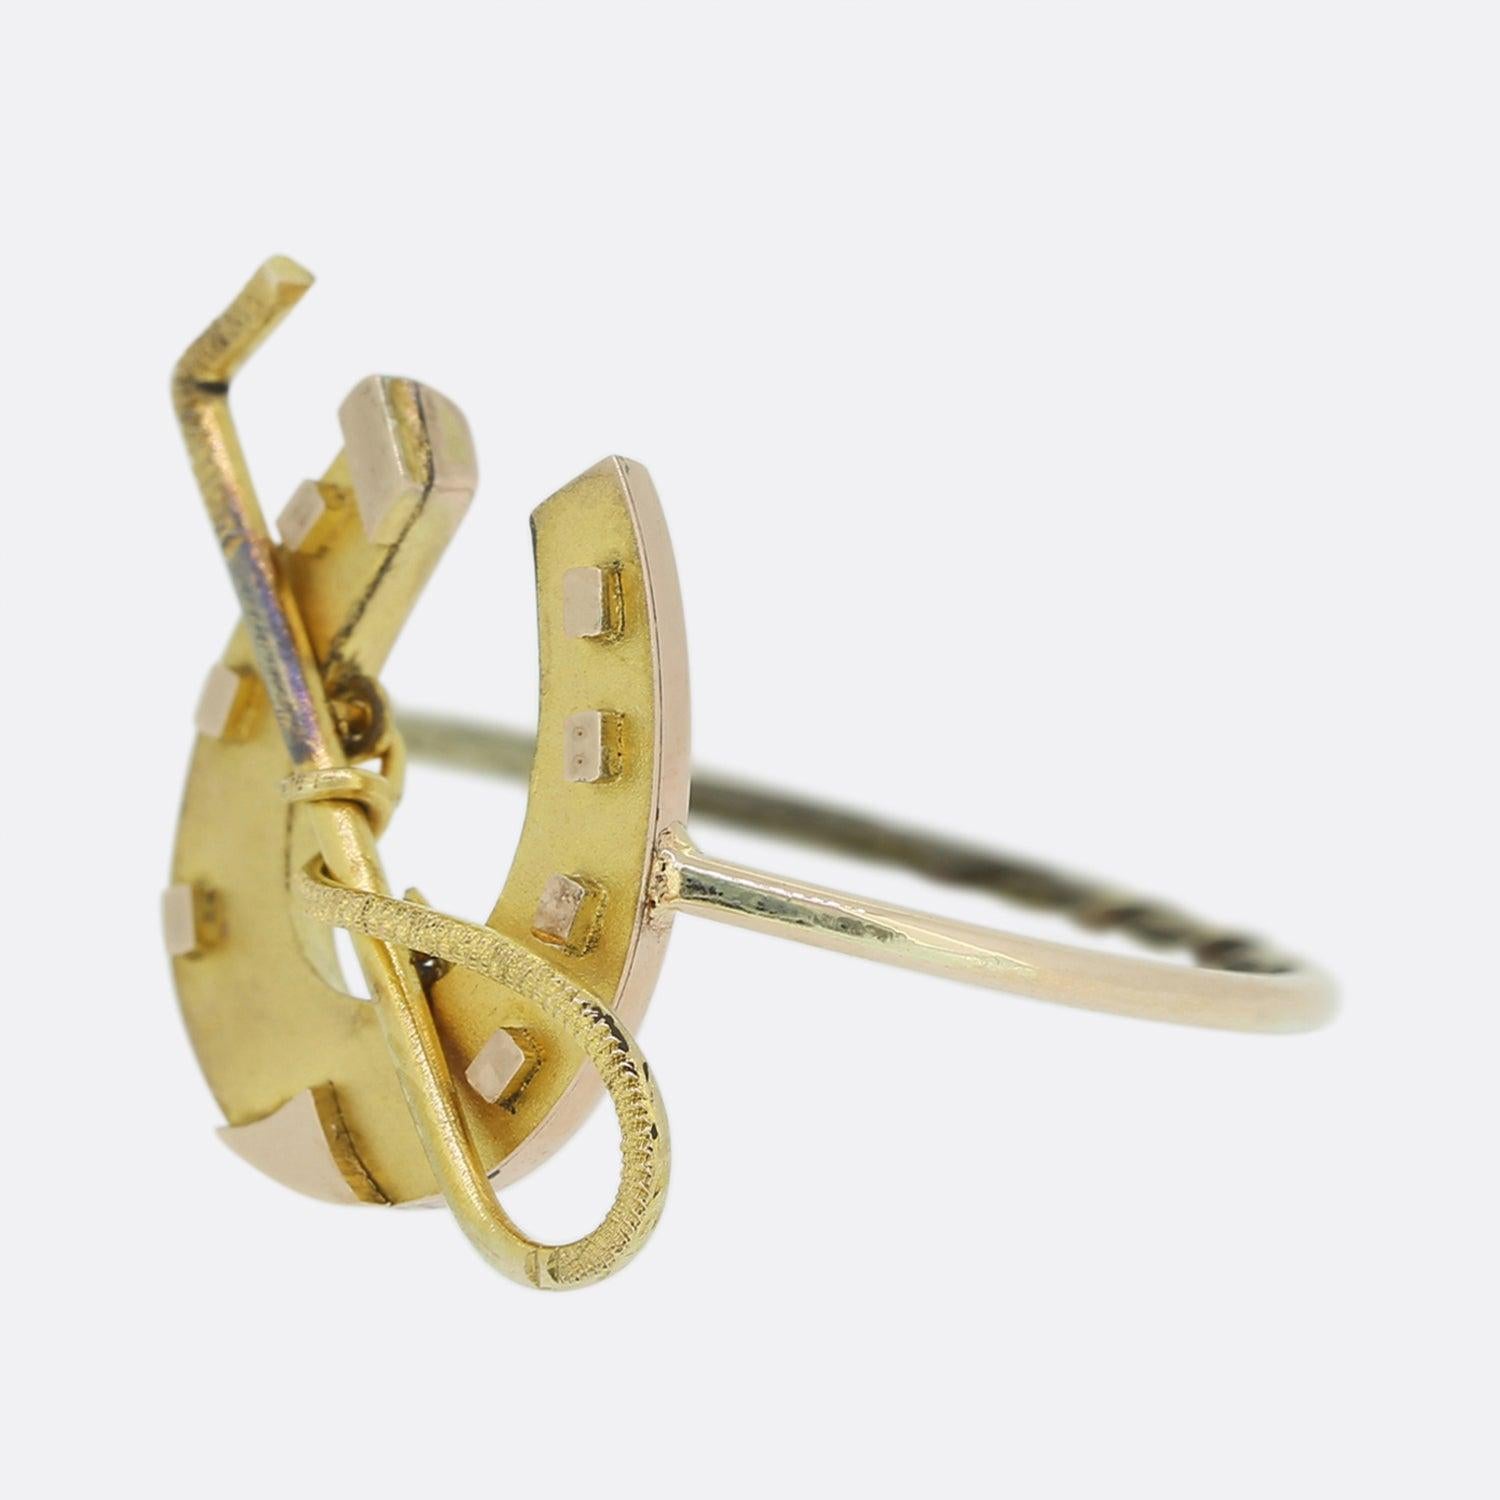 Here we have a fun 15ct yellow gold ring that originally dates back to the Victorian era. This ring has been crafted in the shape of a horseshoe and riding crop.
This piece started life as a pin but has been transformed into a ring by master antique